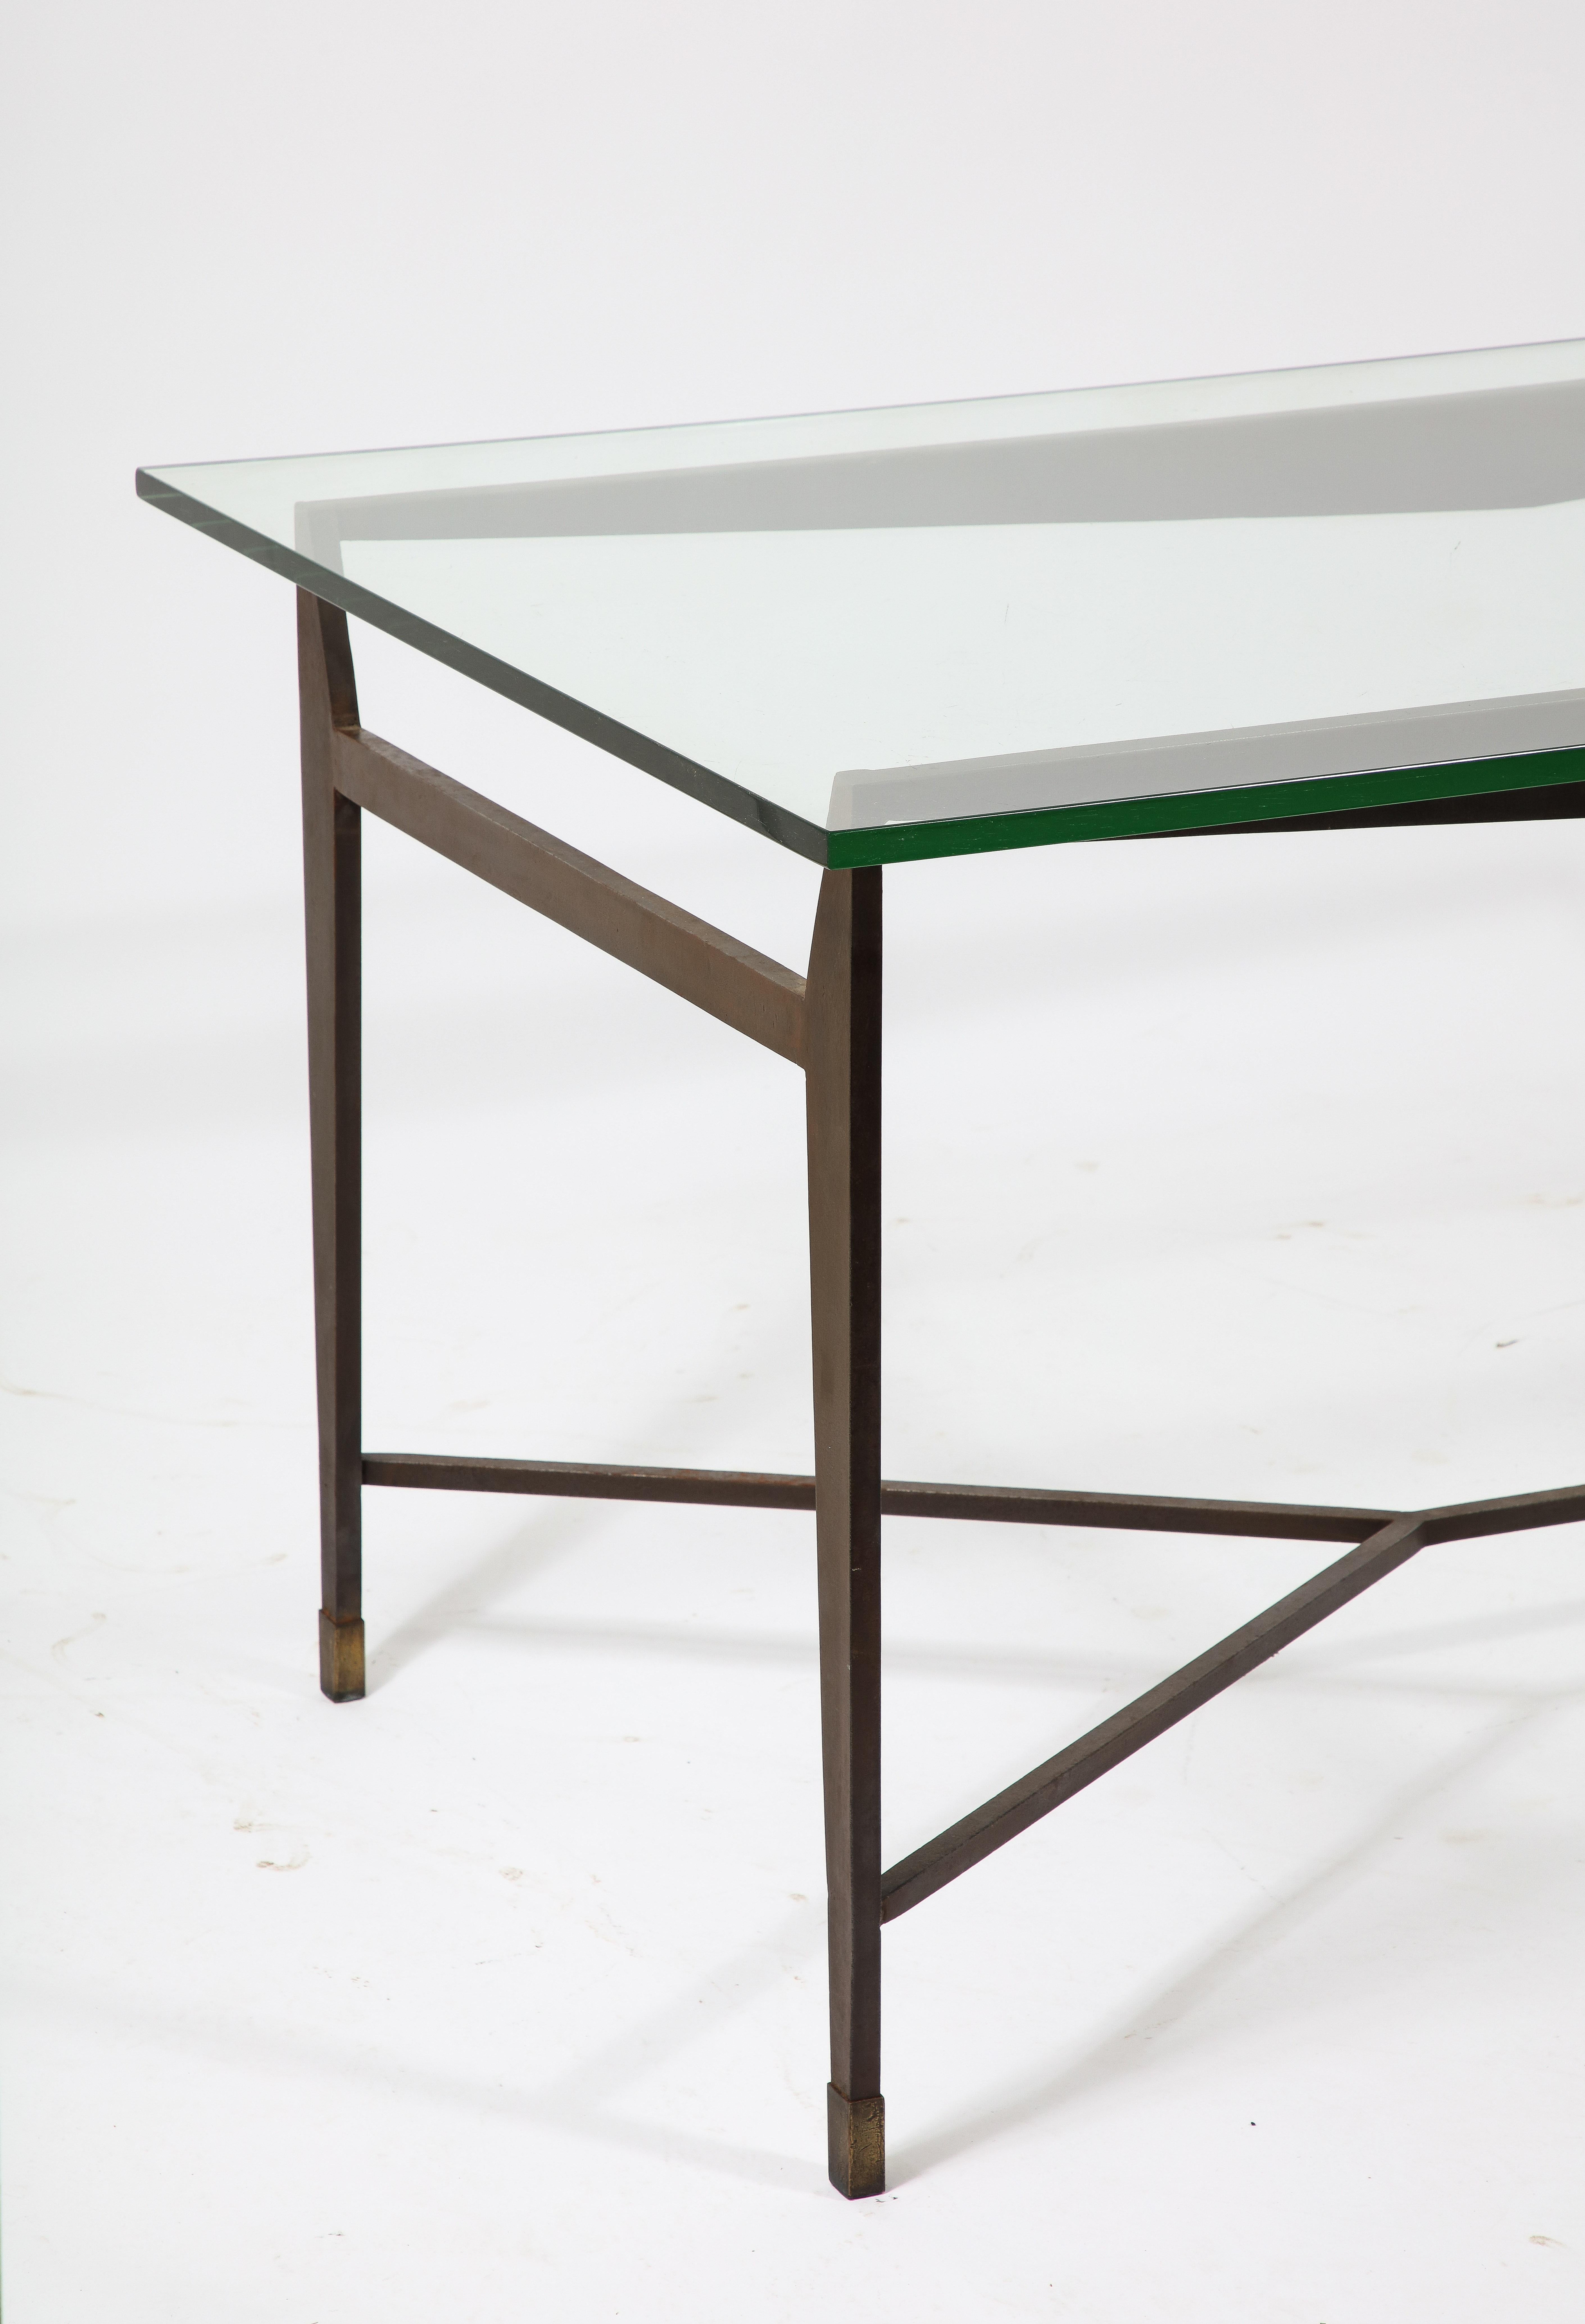 Jacques Quinet Dining Table in Wrought Iron & Saint Gobain Glass, France 1950's For Sale 5